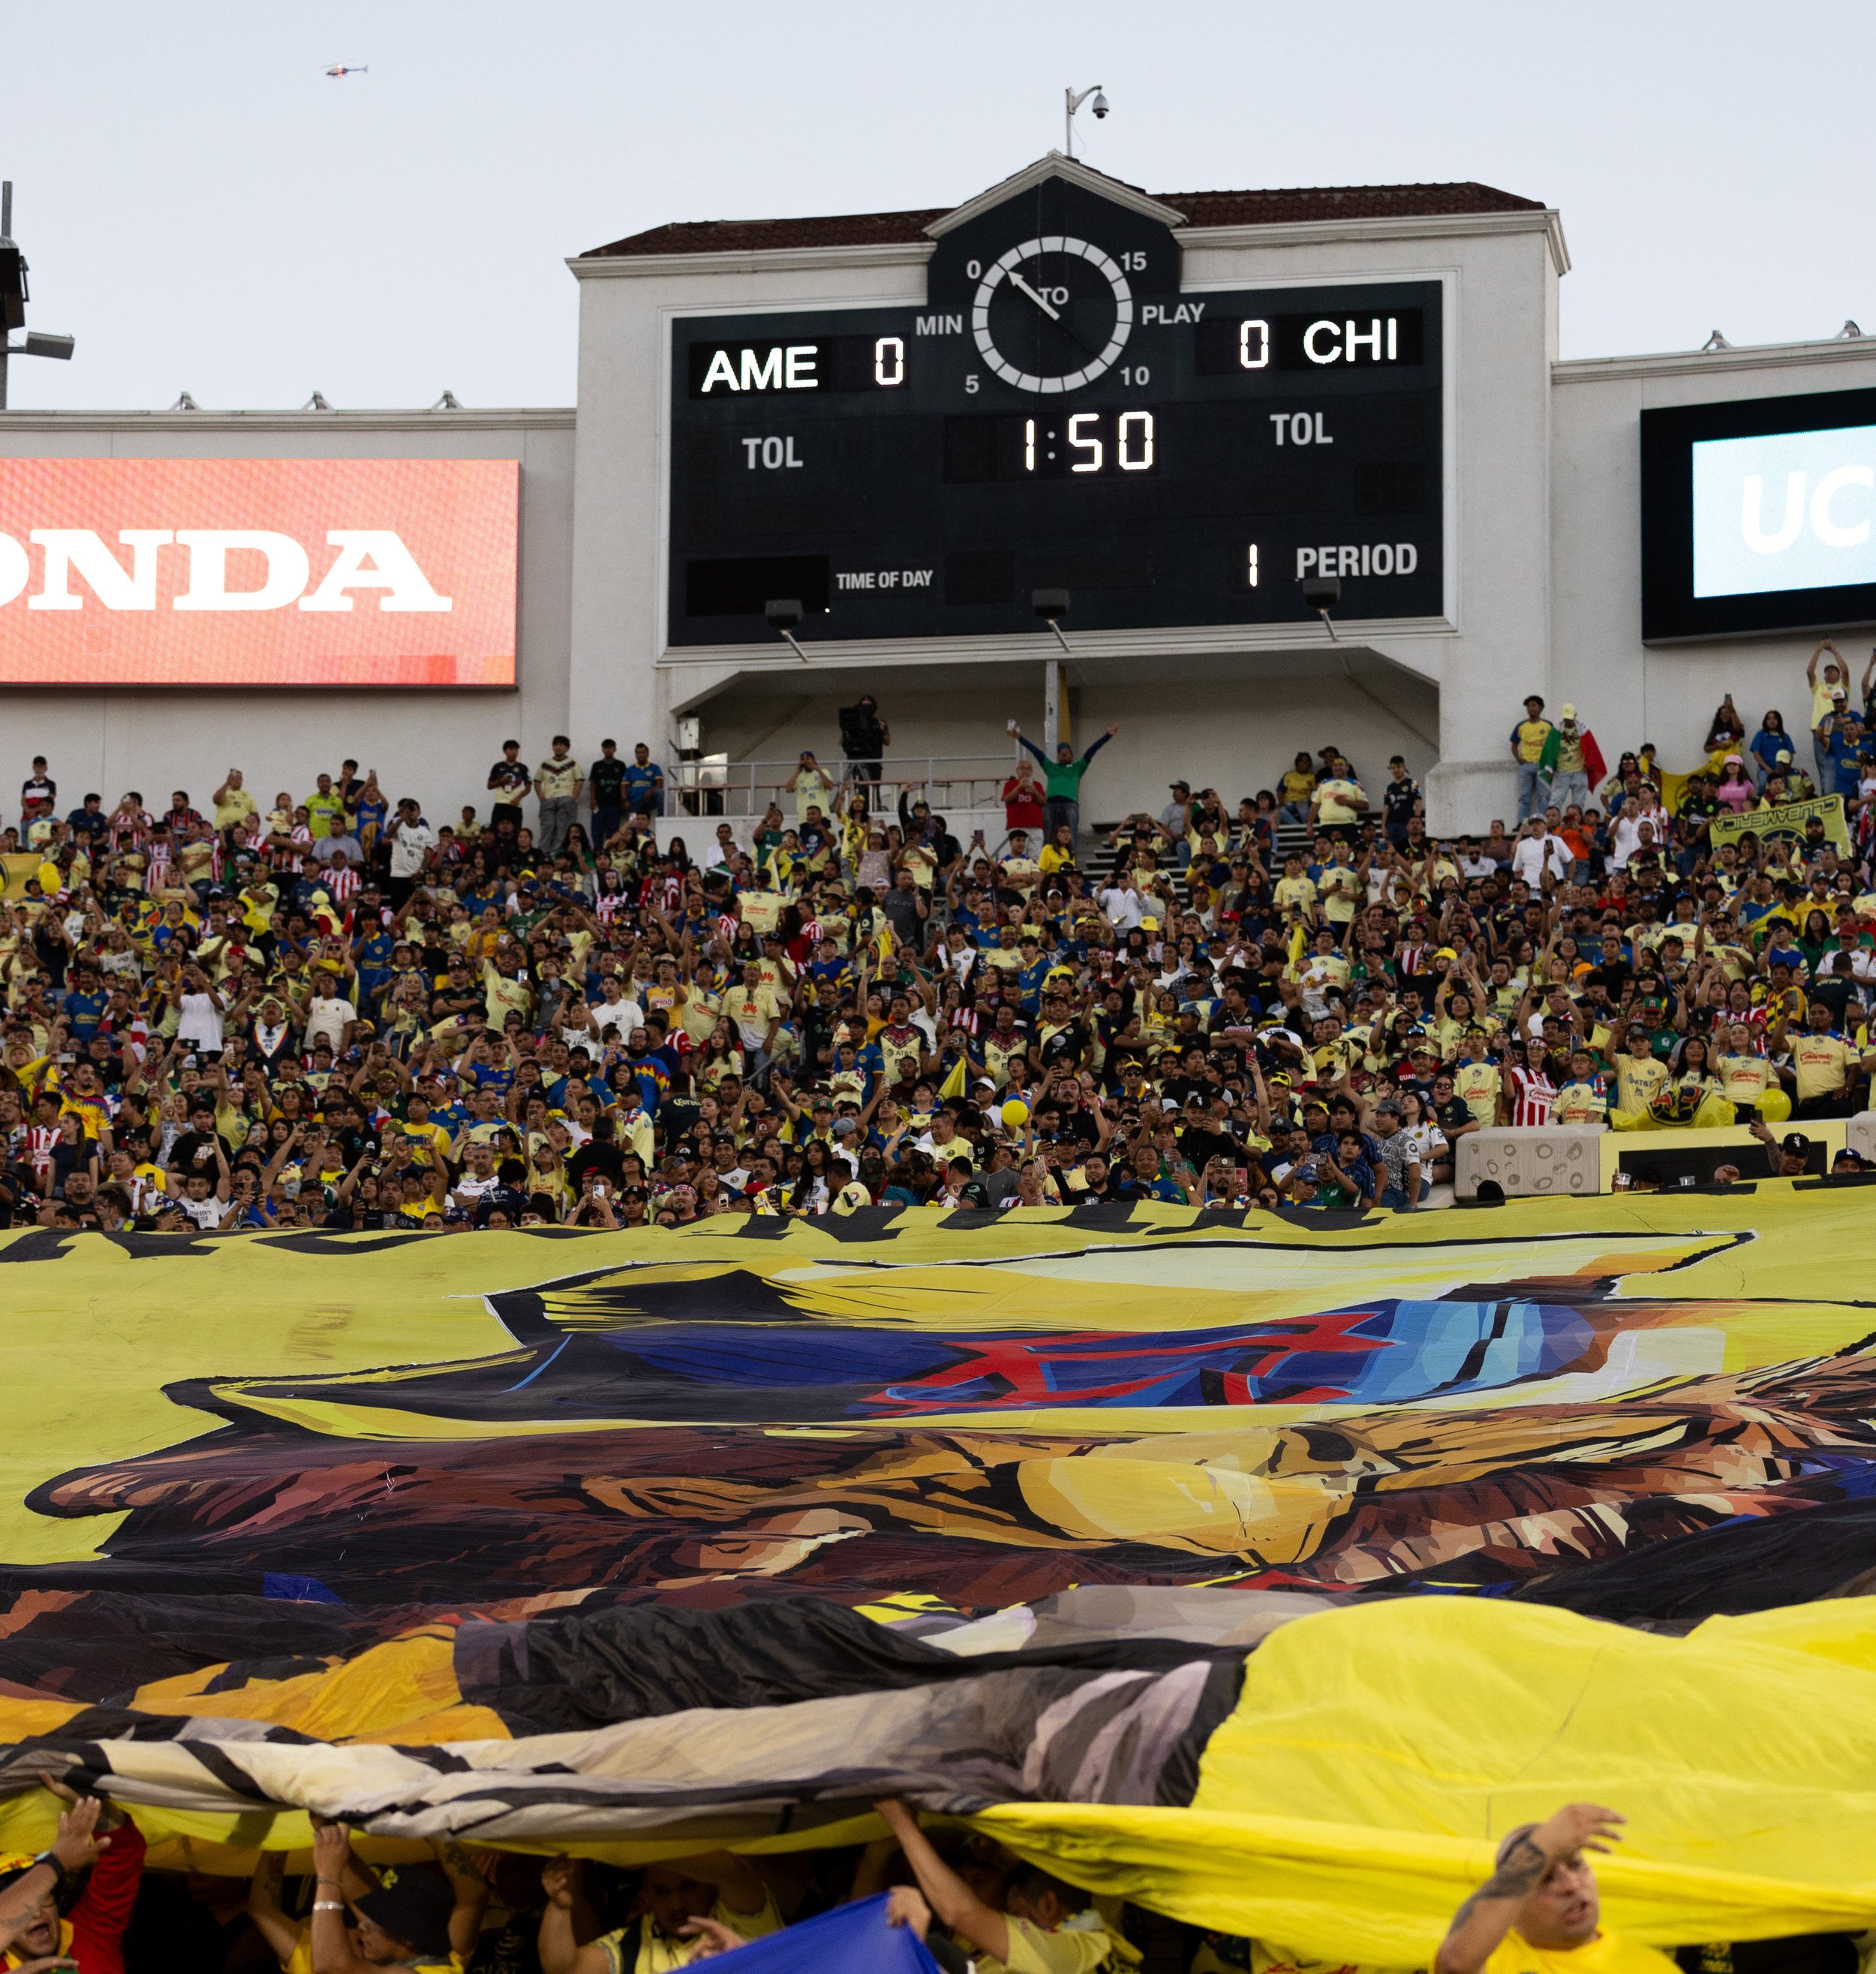  Club America fans holding up a yellow banner with an eagle on it during the match against Chivas at the Rose Bowl in Pasadena, Calif. on Sunday, Oct. 15. (Danilo Perez | The Corsair) 